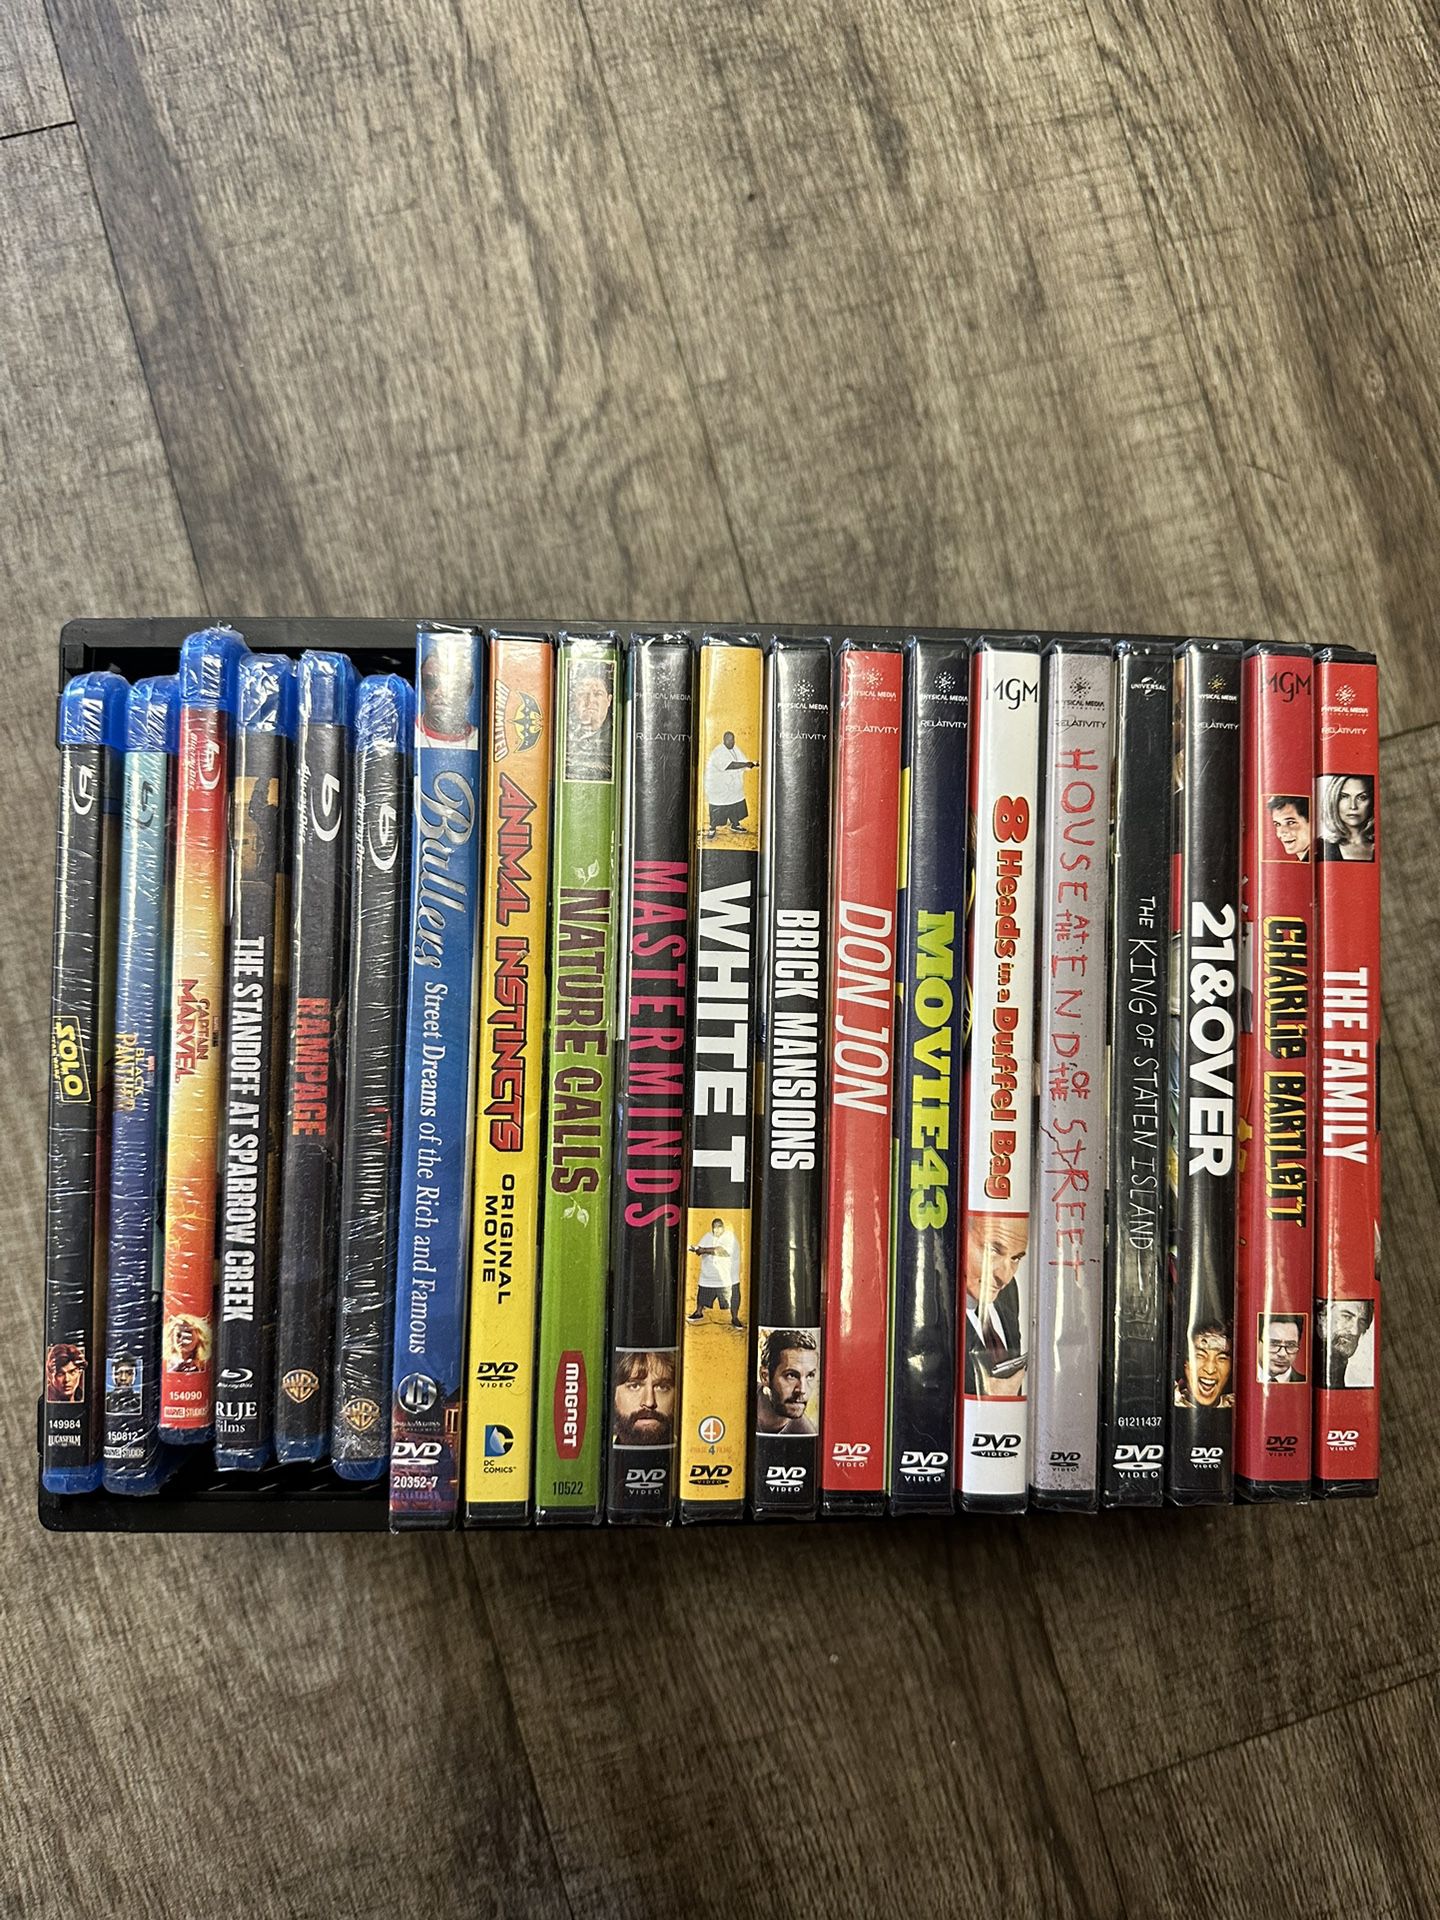 20 New Sealed DVDs Blu Ray An DVD 